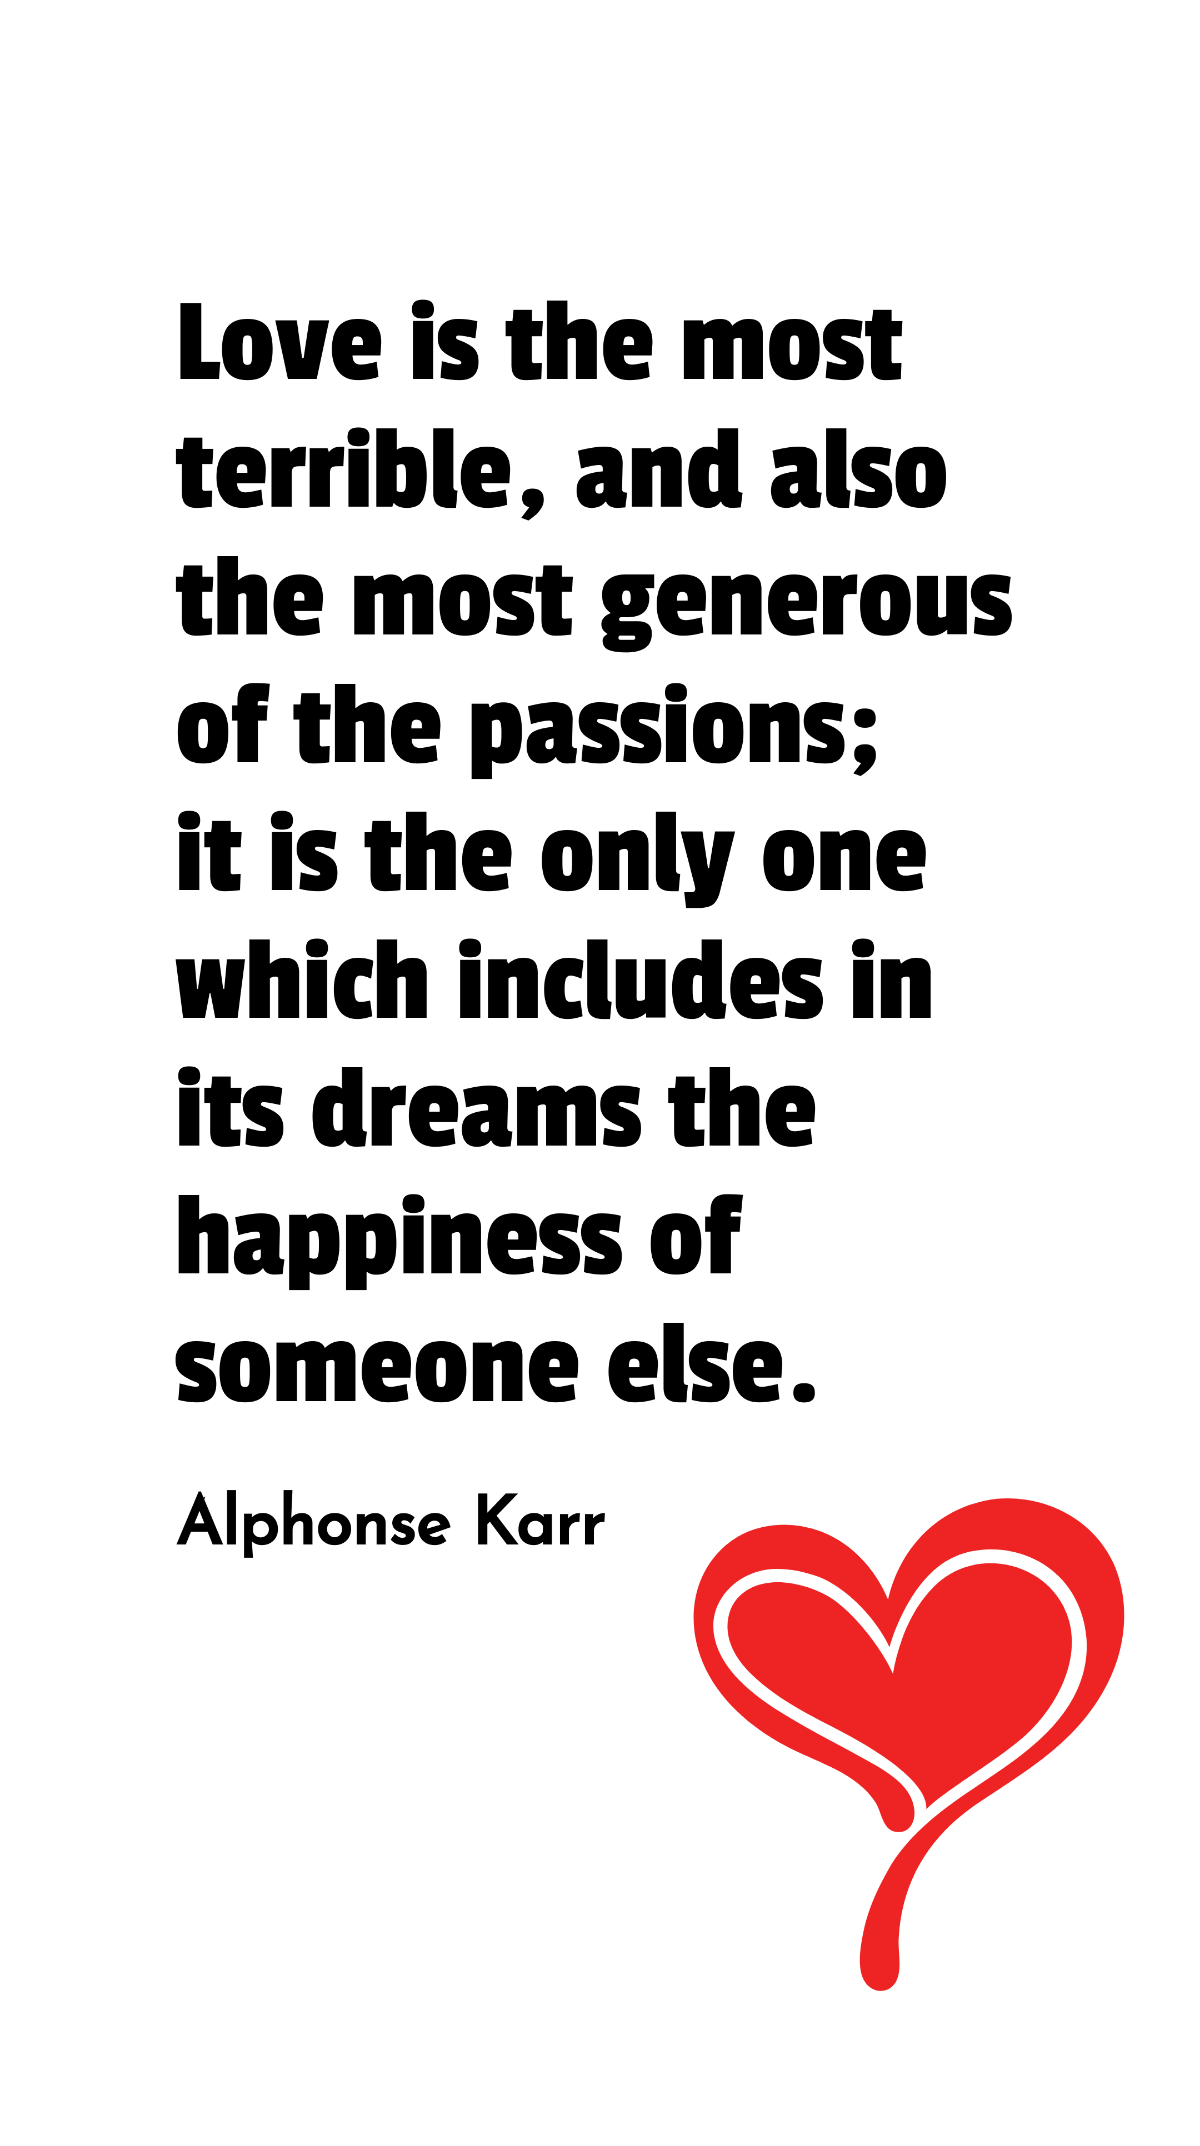 Alphonse Karr - Love is the most terrible, and also the most generous of the passions; it is the only one which includes in its dreams the happiness of someone else.  Template